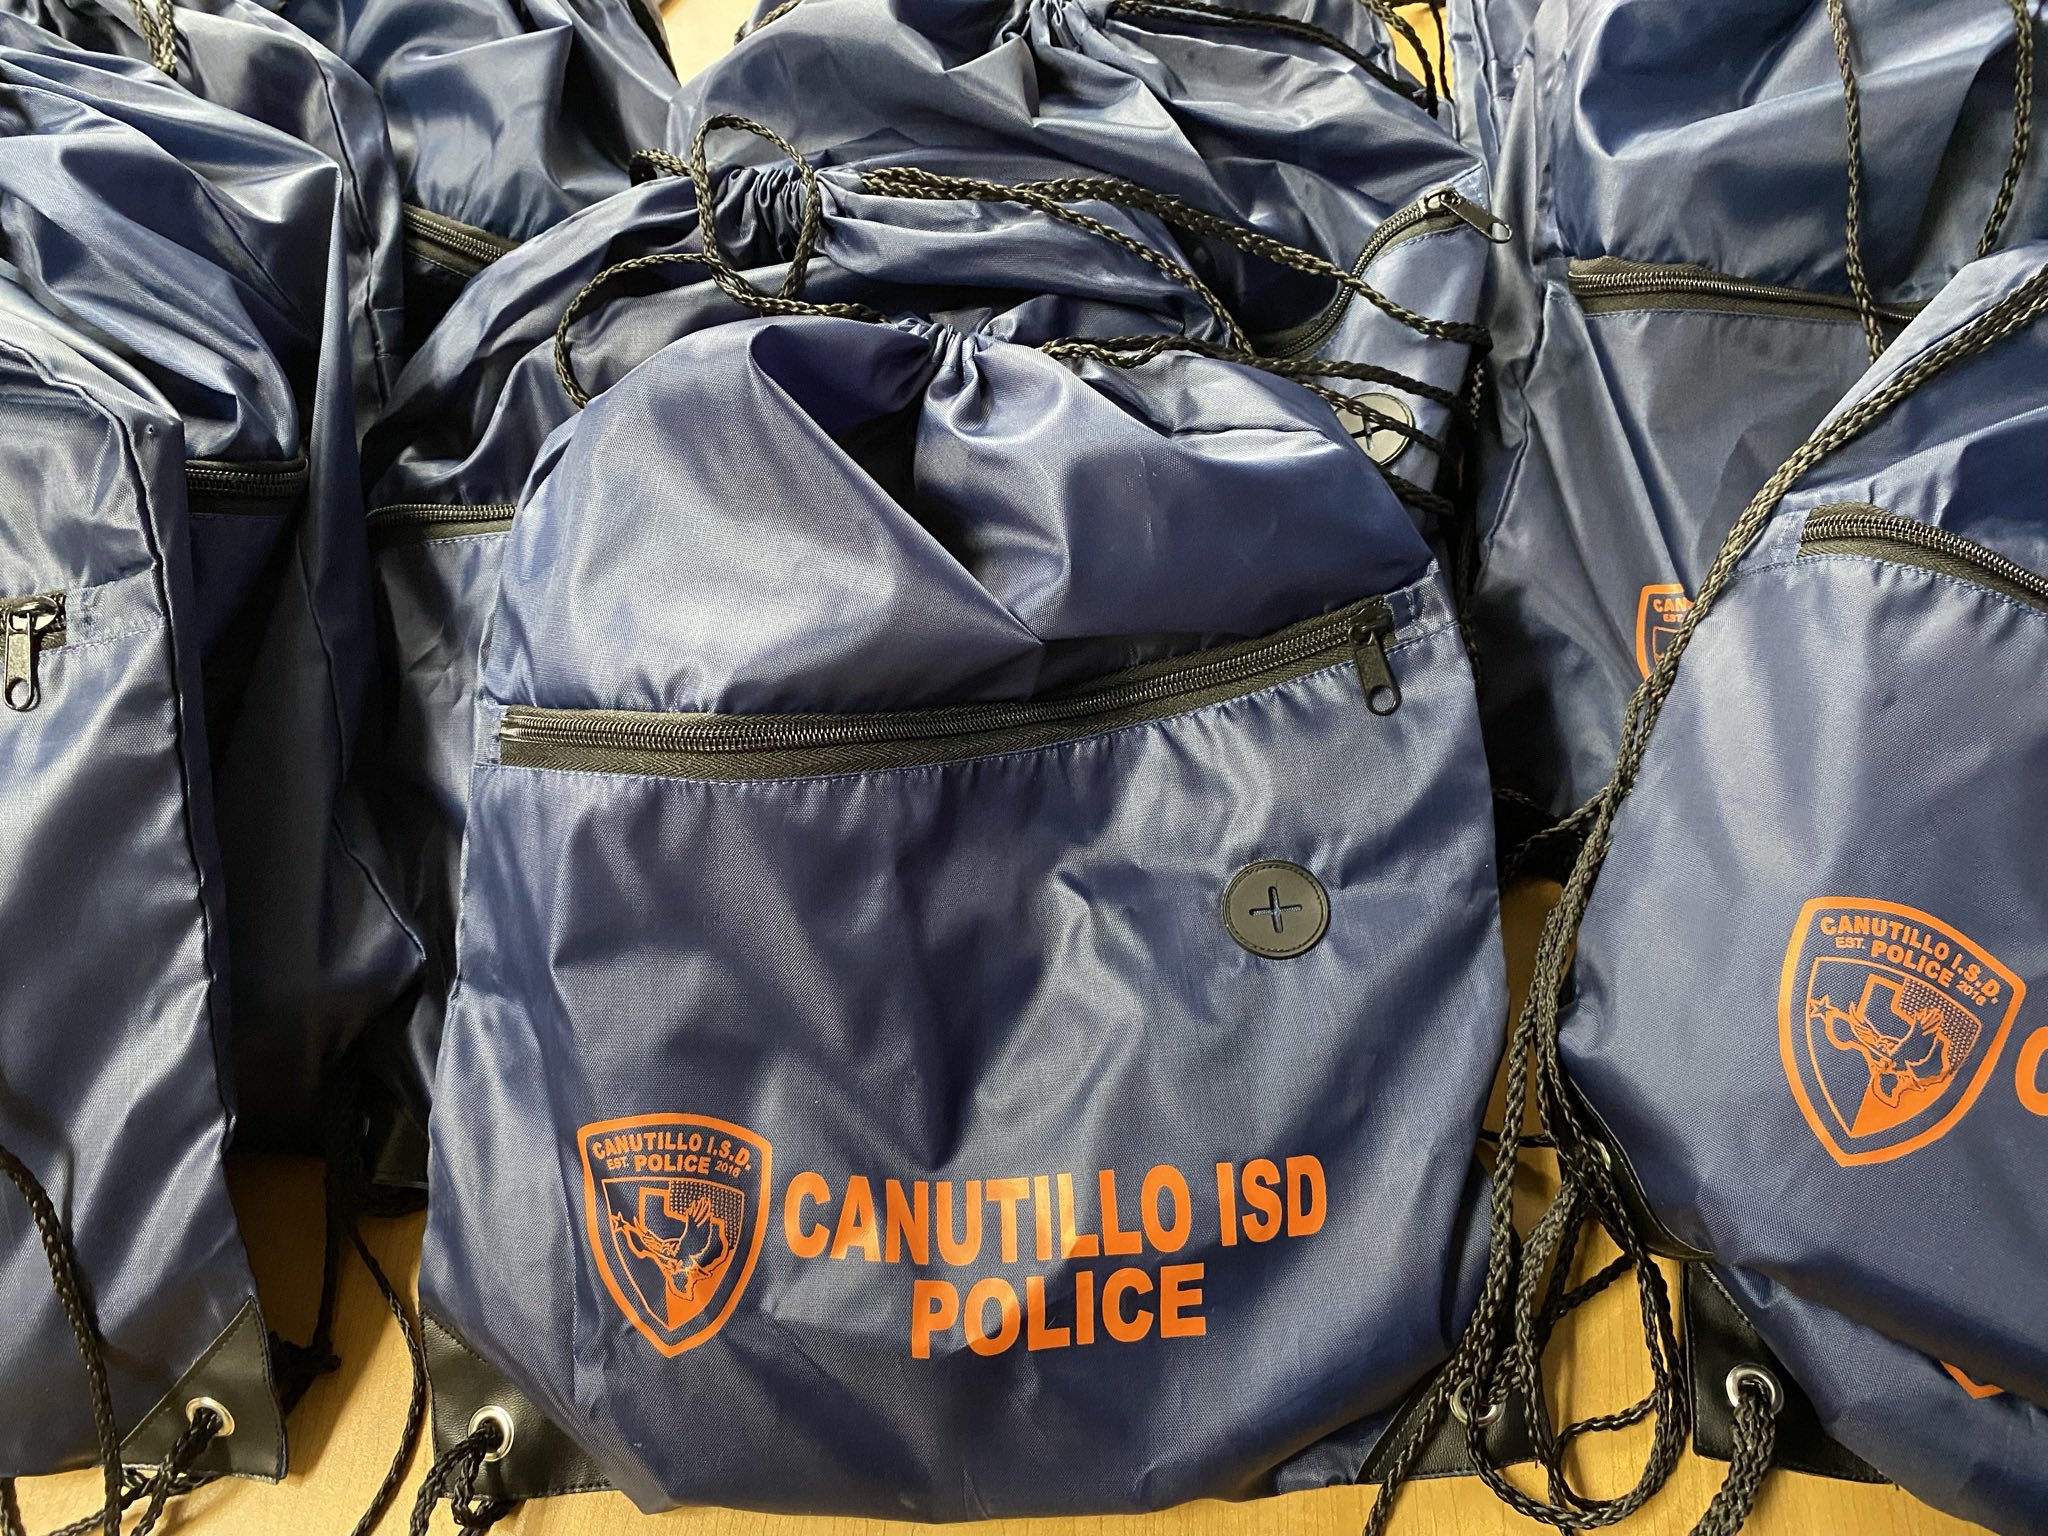 Today, we - Canutillo Independent School District